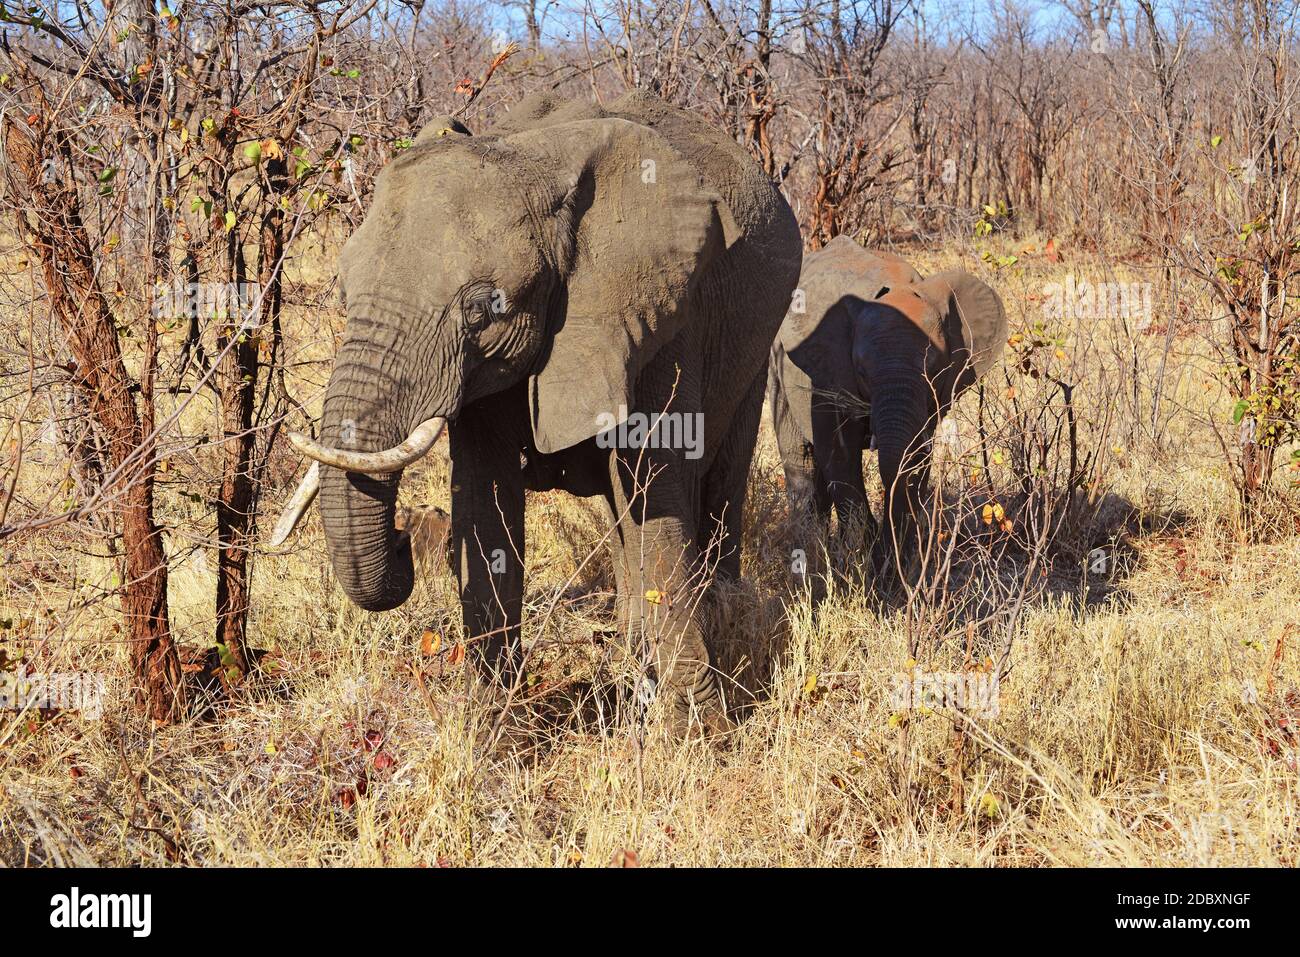 Elephant in the Kruger National Park in South Africa Stock Photo